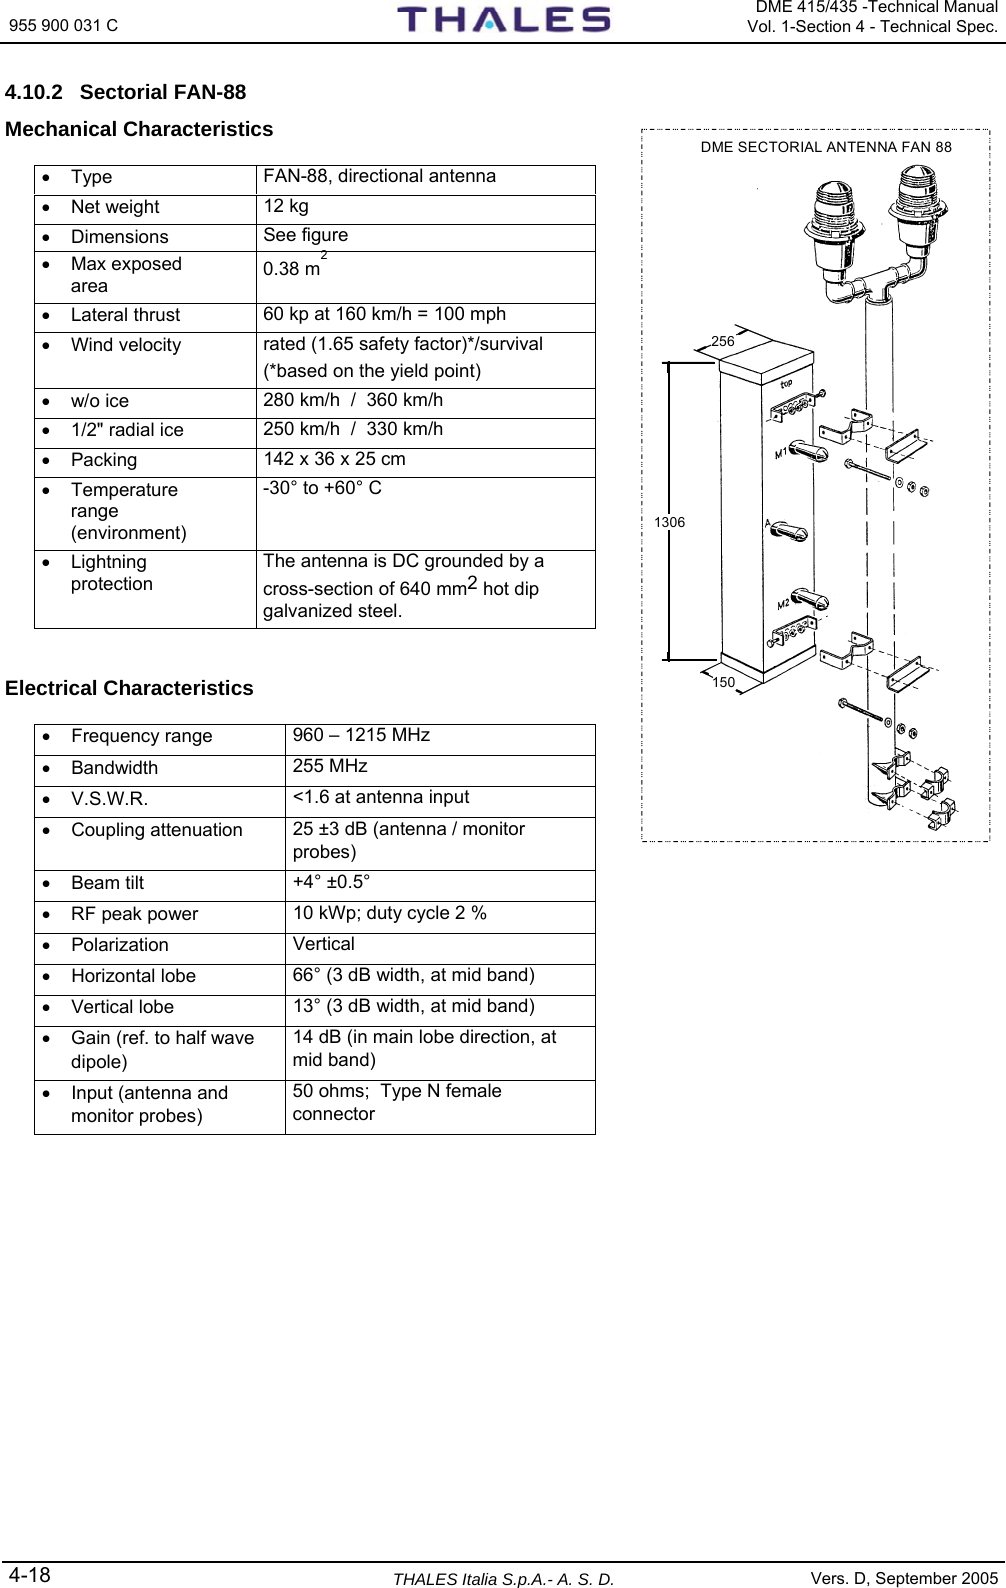 955 900 031 C   DME 415/435 -Technical Manual Vol. 1-Section 4 - Technical Spec. 4-18  THALES Italia S.p.A.- A. S. D. Vers. D, September 2005 4.10.2 Sectorial FAN-88 Mechanical Characteristics  • Type  FAN-88, directional antenna  • Net weight  12 kg • Dimensions  See figure • Max exposed area  0.38 m2 • Lateral thrust  60 kp at 160 km/h = 100 mph • Wind velocity  rated (1.65 safety factor)*/survival (*based on the yield point) • w/o ice  280 km/h  /  360 km/h •  1/2&quot; radial ice  250 km/h  /  330 km/h • Packing  142 x 36 x 25 cm • Temperature range (environment) -30° to +60° C • Lightning protection The antenna is DC grounded by a cross-section of 640 mm2 hot dip galvanized steel.   Electrical Characteristics  • Frequency range  960 – 1215 MHz • Bandwidth  255 MHz • V.S.W.R.  &lt;1.6 at antenna input • Coupling attenuation  25 ±3 dB (antenna / monitor probes) • Beam tilt  +4° ±0.5° •  RF peak power  10 kWp; duty cycle 2 % • Polarization  Vertical • Horizontal lobe  66° (3 dB width, at mid band) • Vertical lobe  13° (3 dB width, at mid band) •  Gain (ref. to half wave dipole) 14 dB (in main lobe direction, at mid band) • Input (antenna and monitor probes) 50 ohms;  Type N female connector  DME SECTORIAL ANTENNA FAN 881306256150